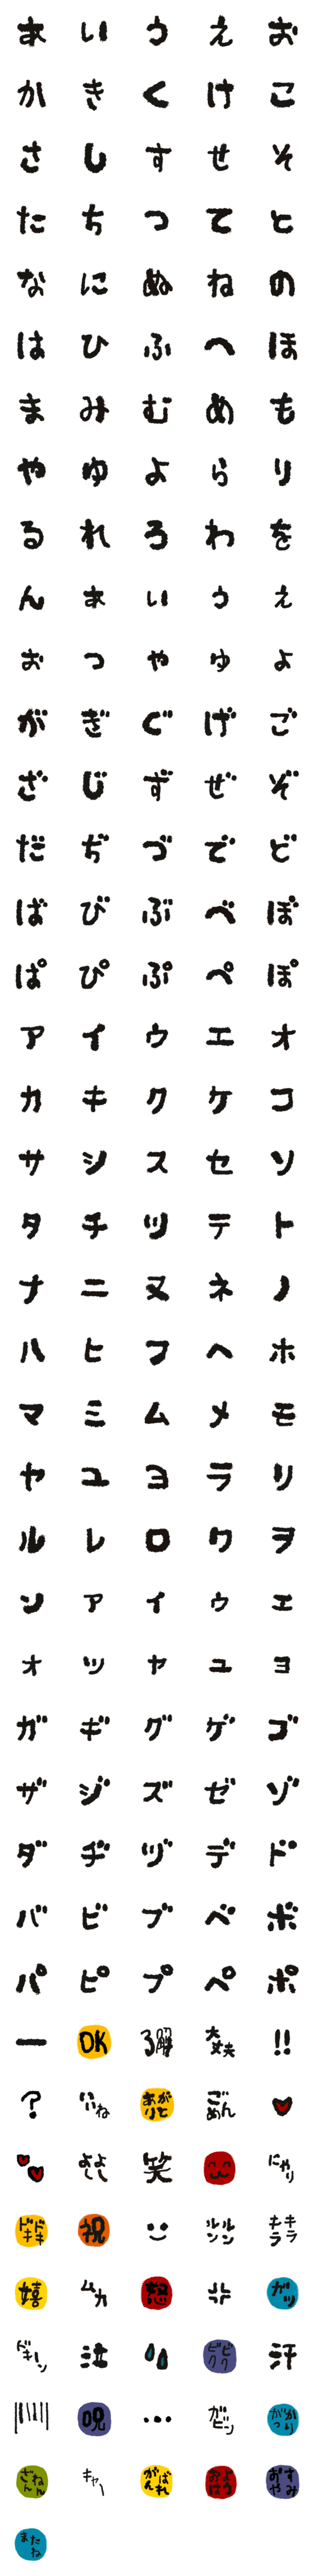 [LINE絵文字]にんげんだもん*絵文字＆デコ文字*の画像一覧